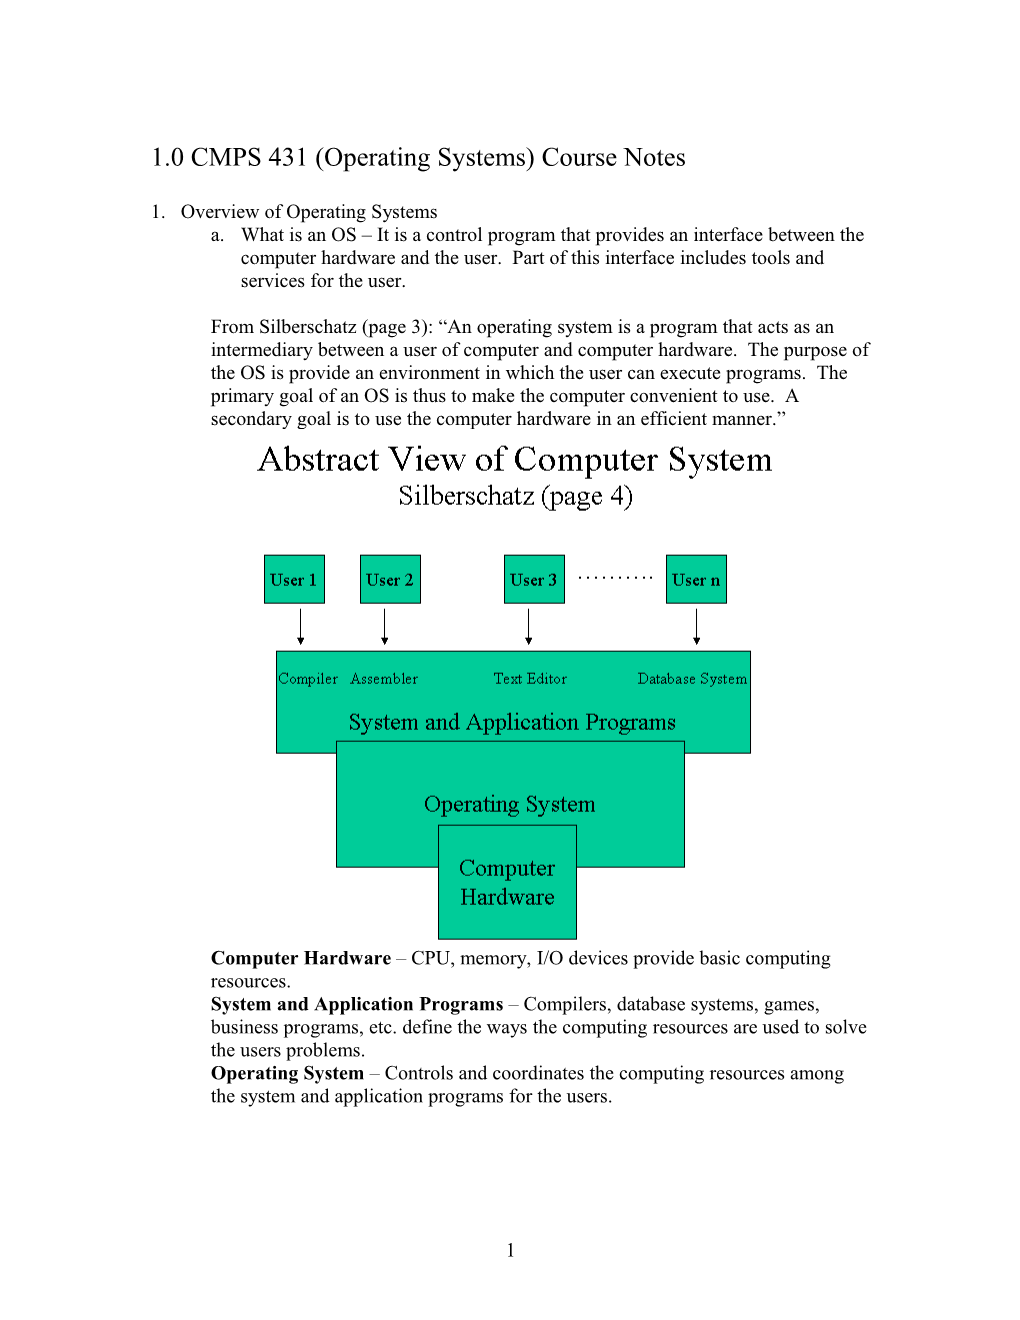 1.0CMPS 431 (Operating Systems) Course Notes